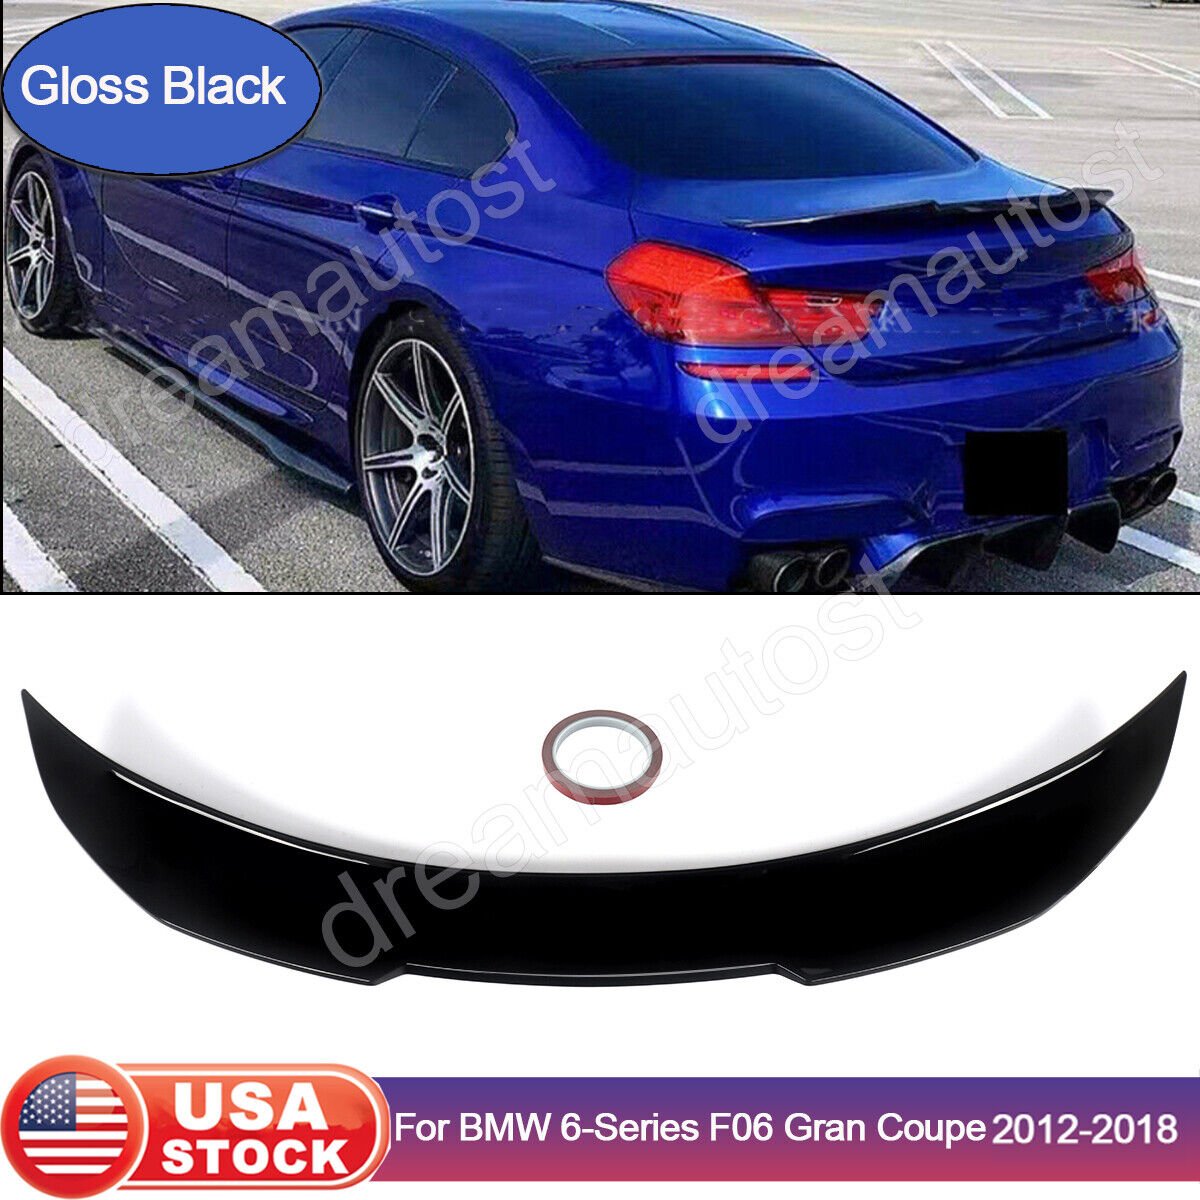 Rear Trunk Wing Spoiler PSM Style Fit BMW F06 640i 650i M6 Gran Coupe 2012-2018